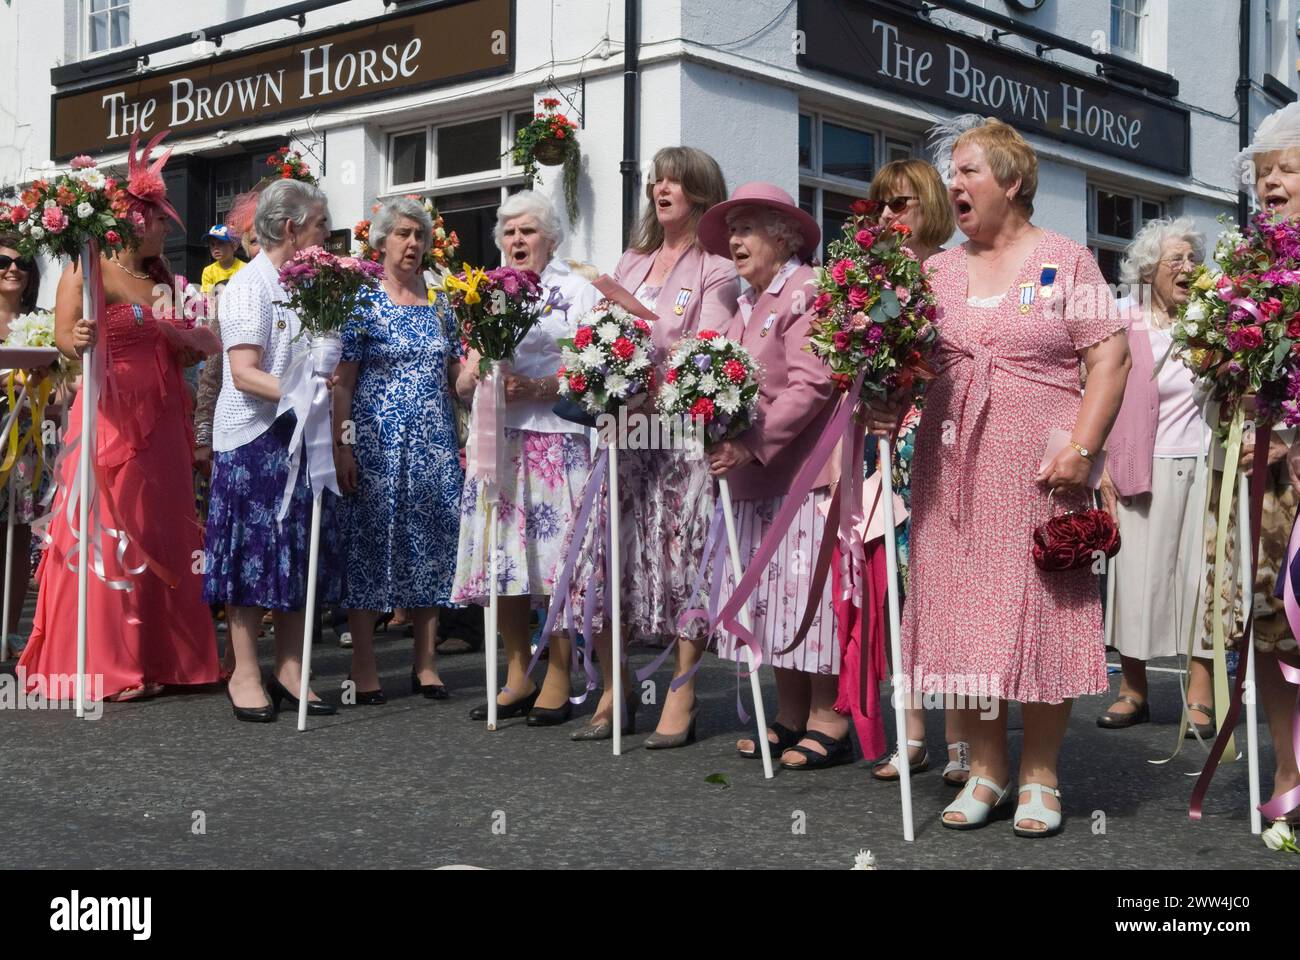 Neston Female Friendly Society Annual Club Walking Day. Ladies Club members at the 'Cross', sing hymns and Land of Hope and Glory. They walk with Flower Sticks. Neston, Cheshire, England 4th June 2015. 2010s UK HOMER SYKES Stock Photo